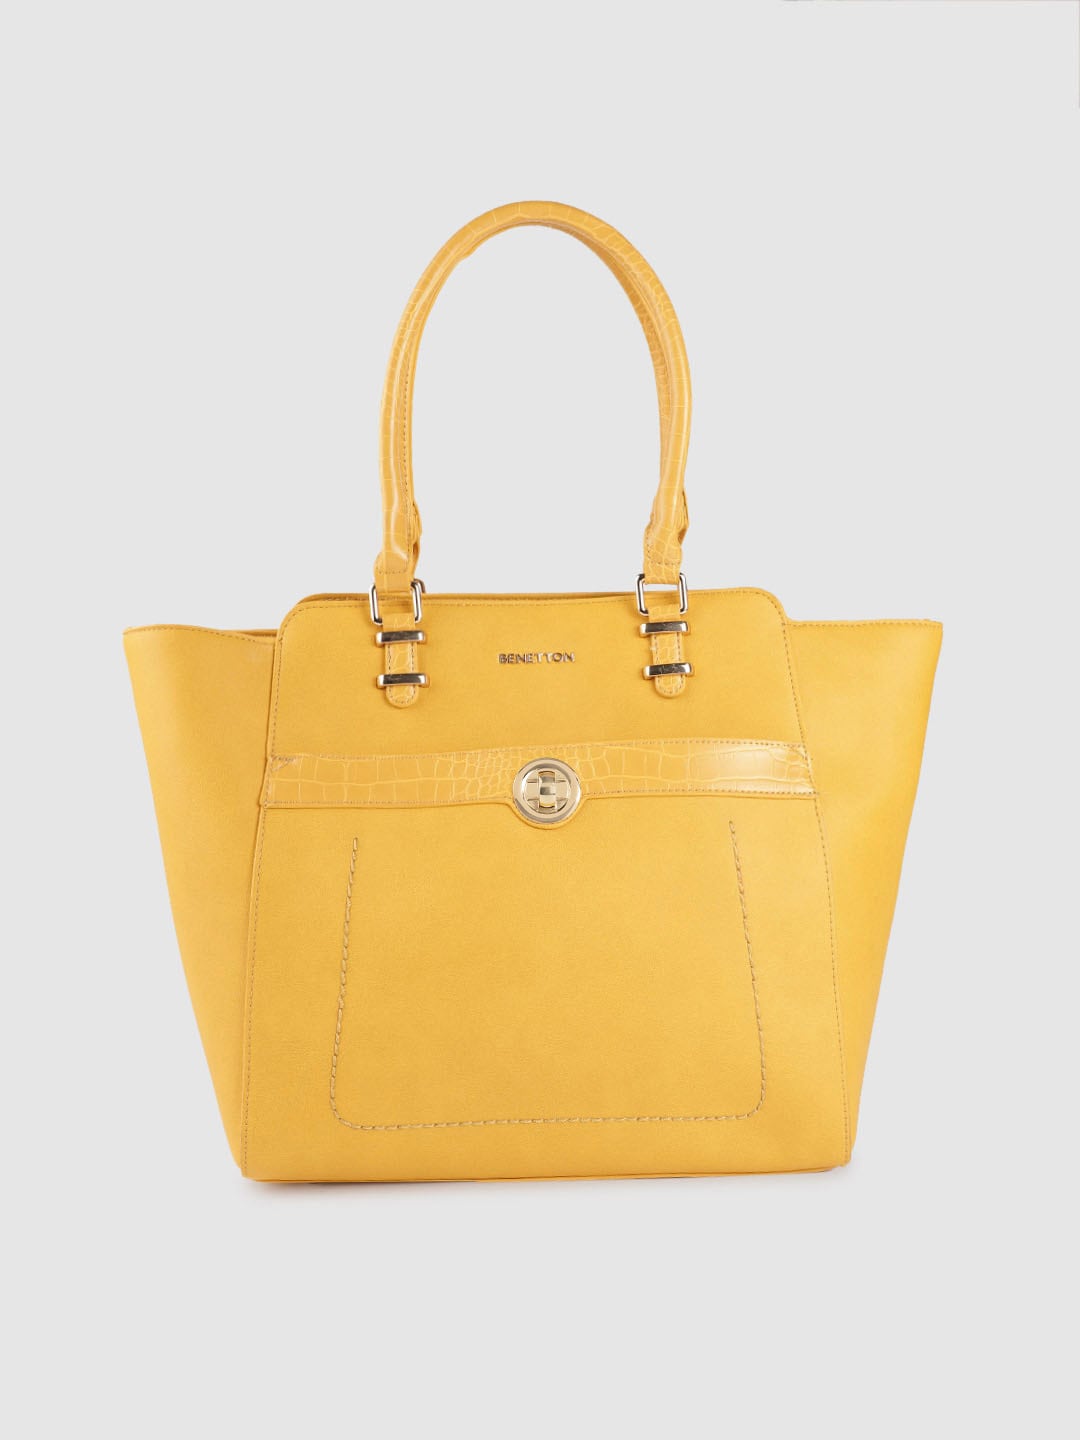 United Colors of Benetton Women Yellow Shoulder Bag Price in India